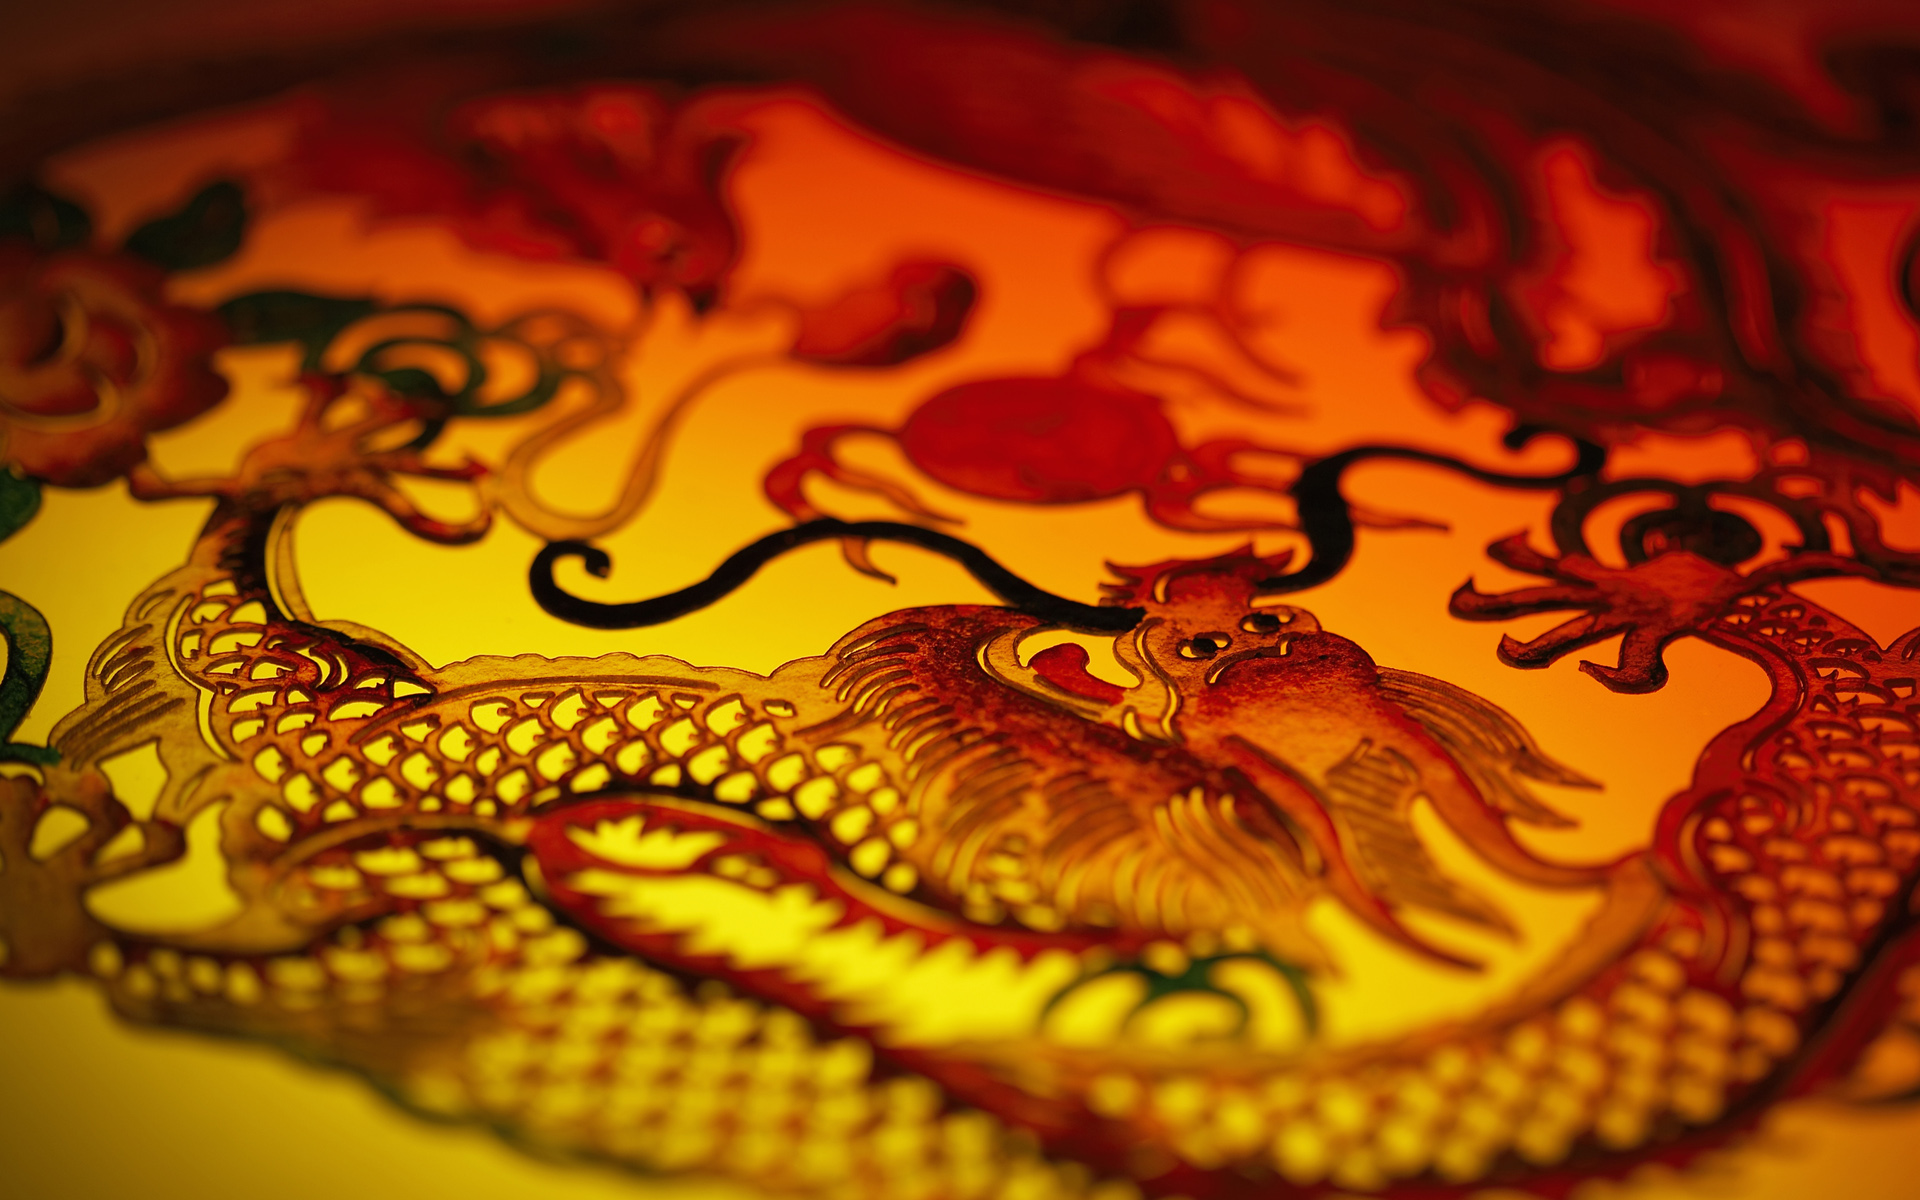 Year Of The Dragon Wallpaper High Definition High Quality Widescreen